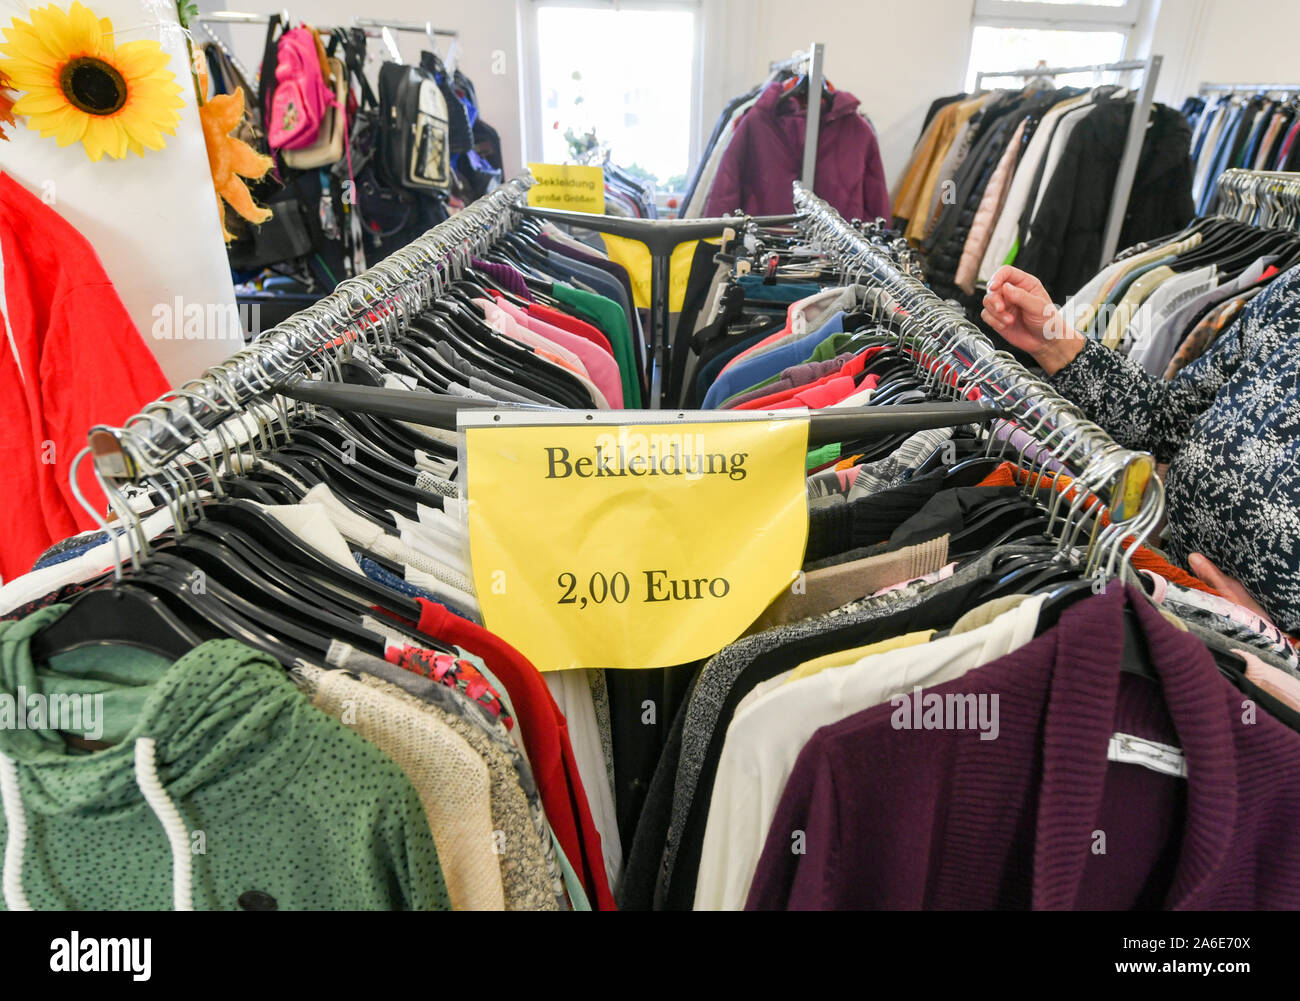 Dresden, Germany. 25th Oct, 2019. Clothing for the cold season can be found  in the clothing department of the Social Department Store. Shirts, shirts  and jackets cost two euros. Needy citizens may